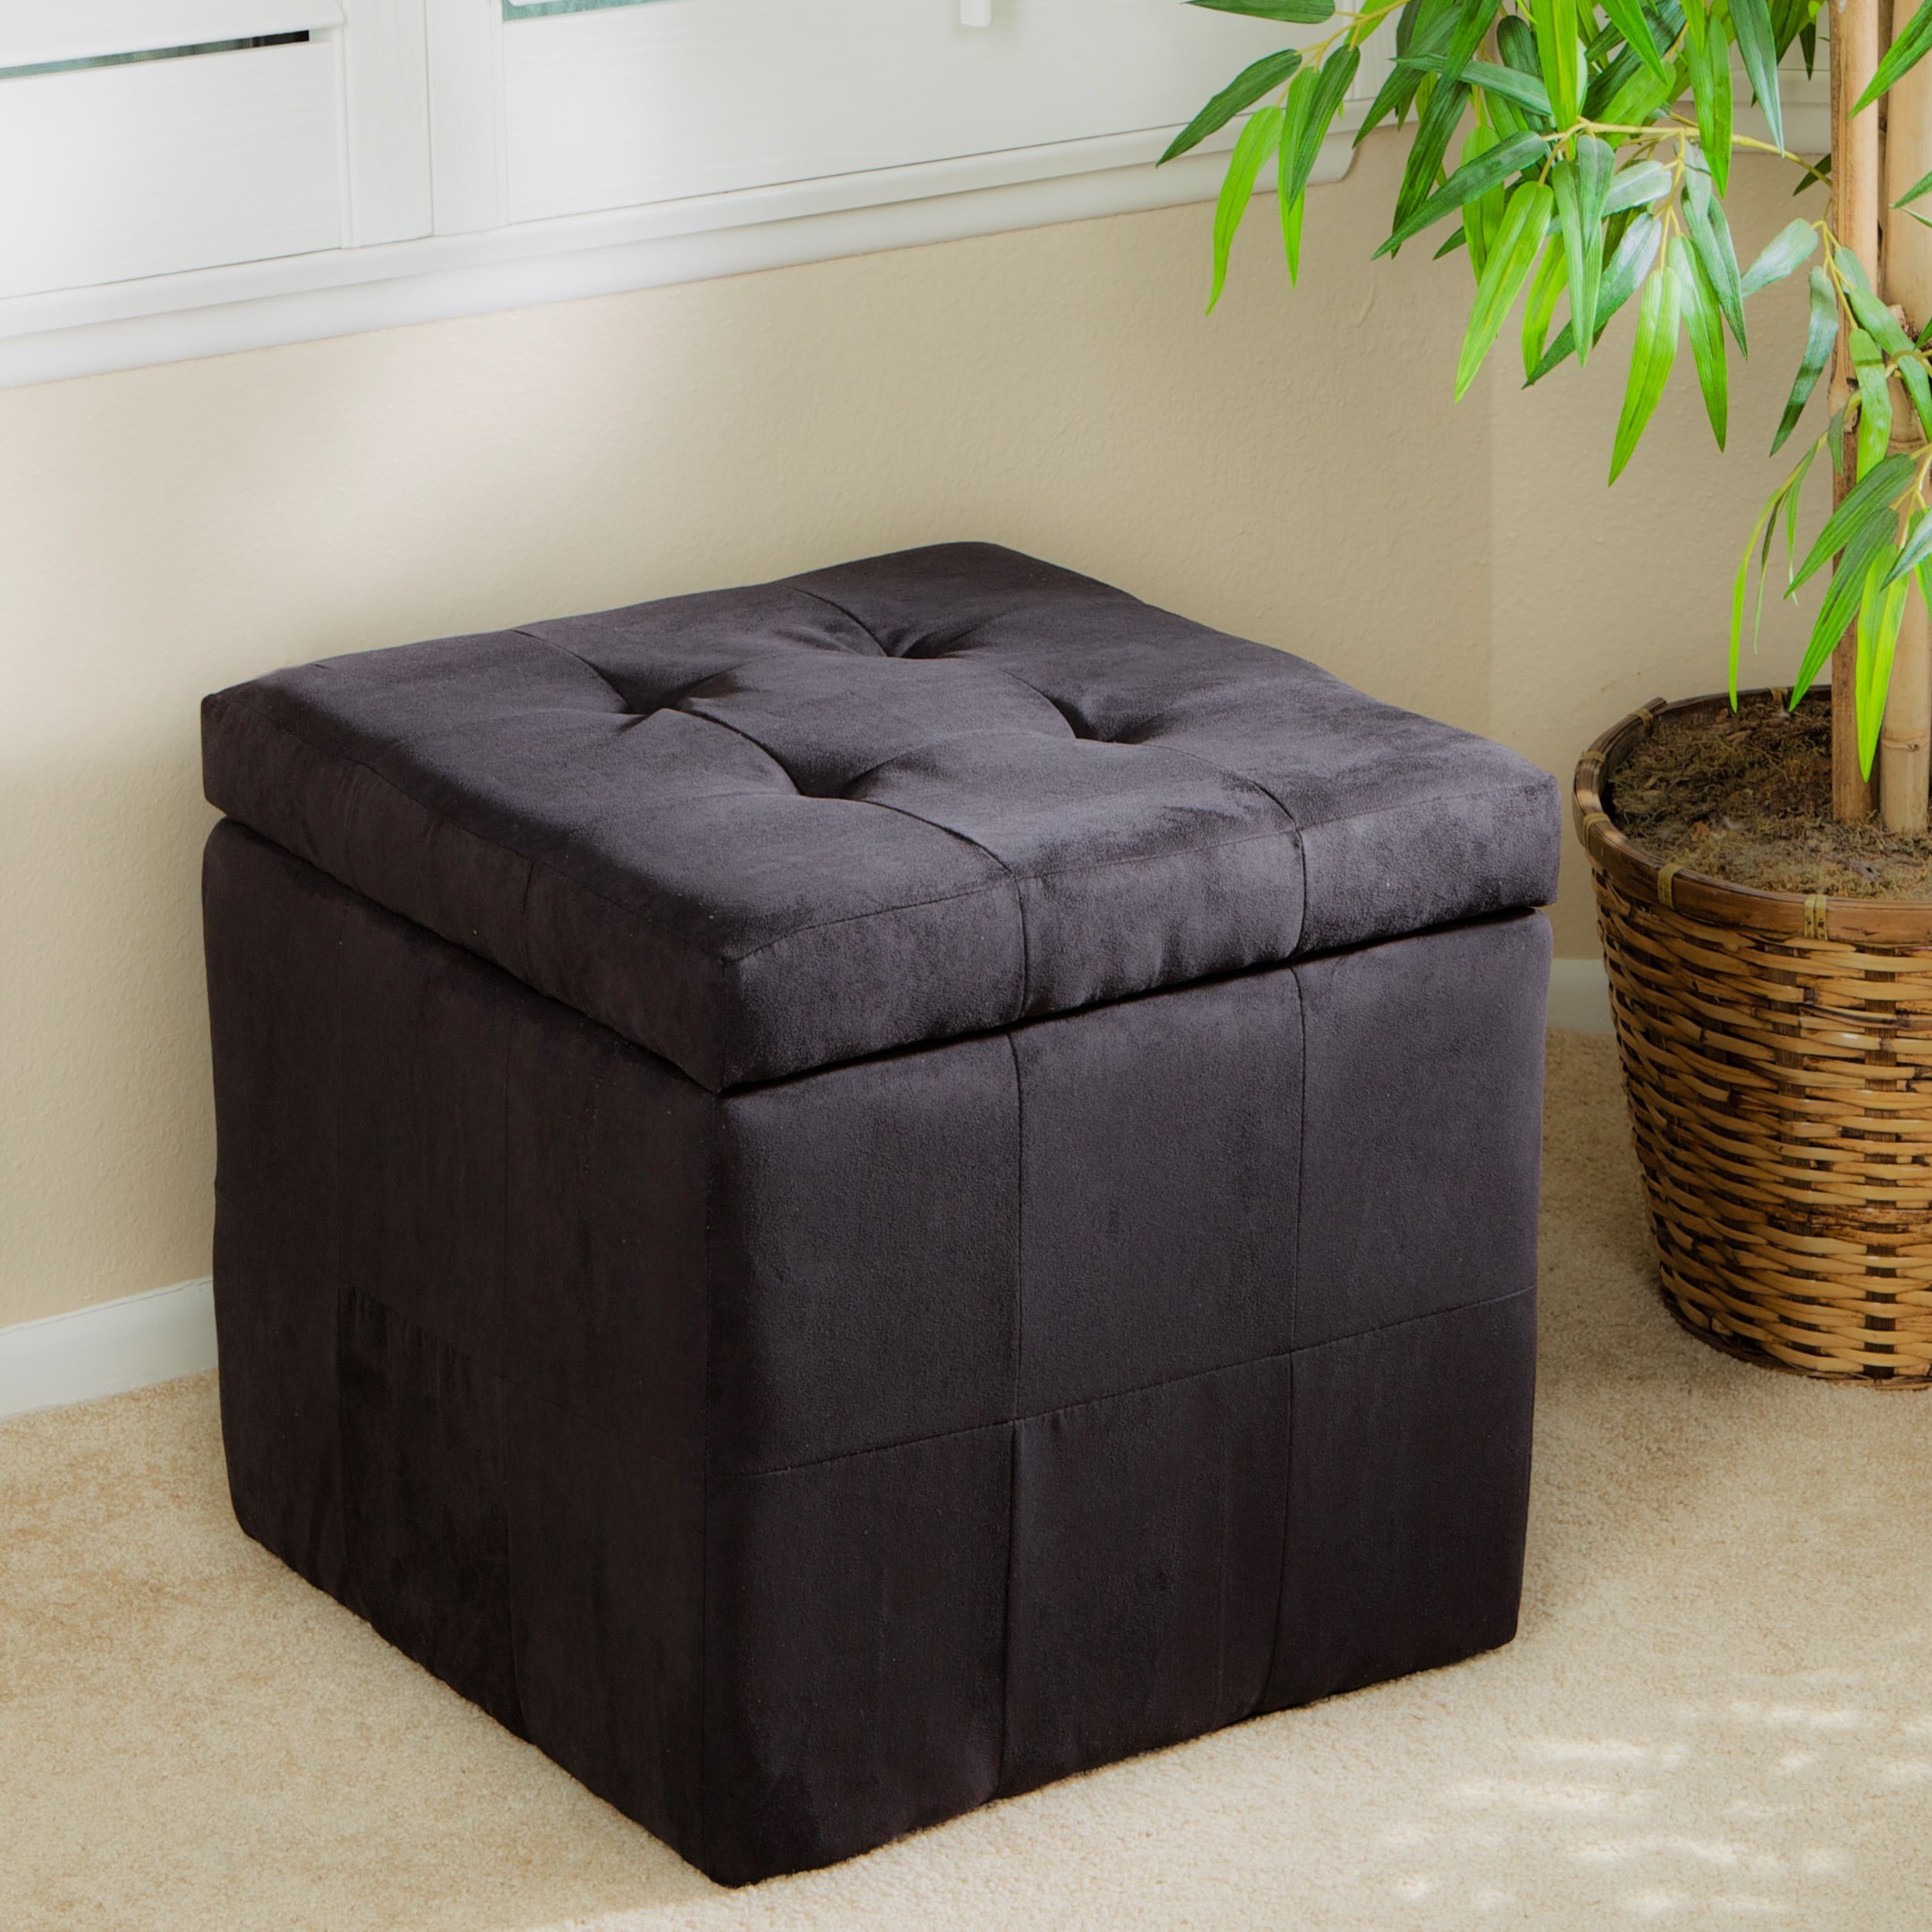 Trendy Brown Fabric Tufted Surfboard Ottomans With Regard To Tufted Black Fabric Storage Cube Ottoman – 13915122 – Overstock (View 6 of 10)